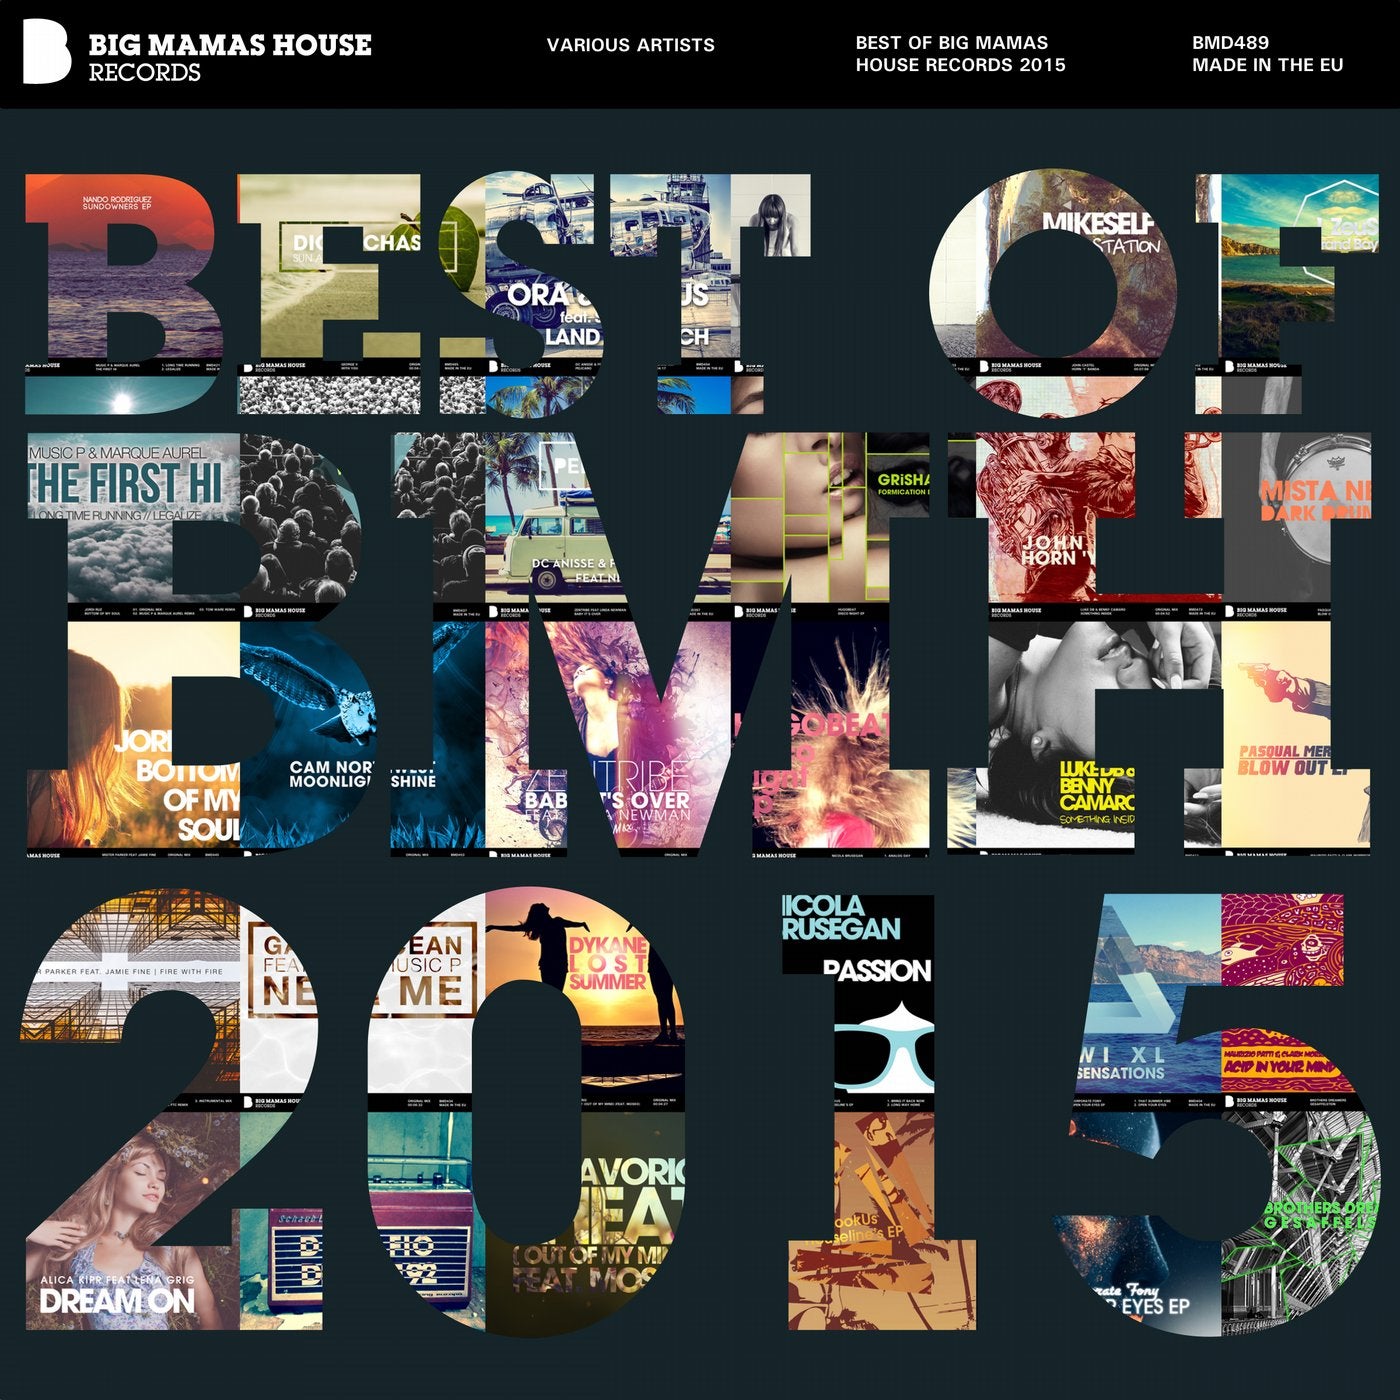 Best of Big Mamas House Records 2015 (Deluxe Version)